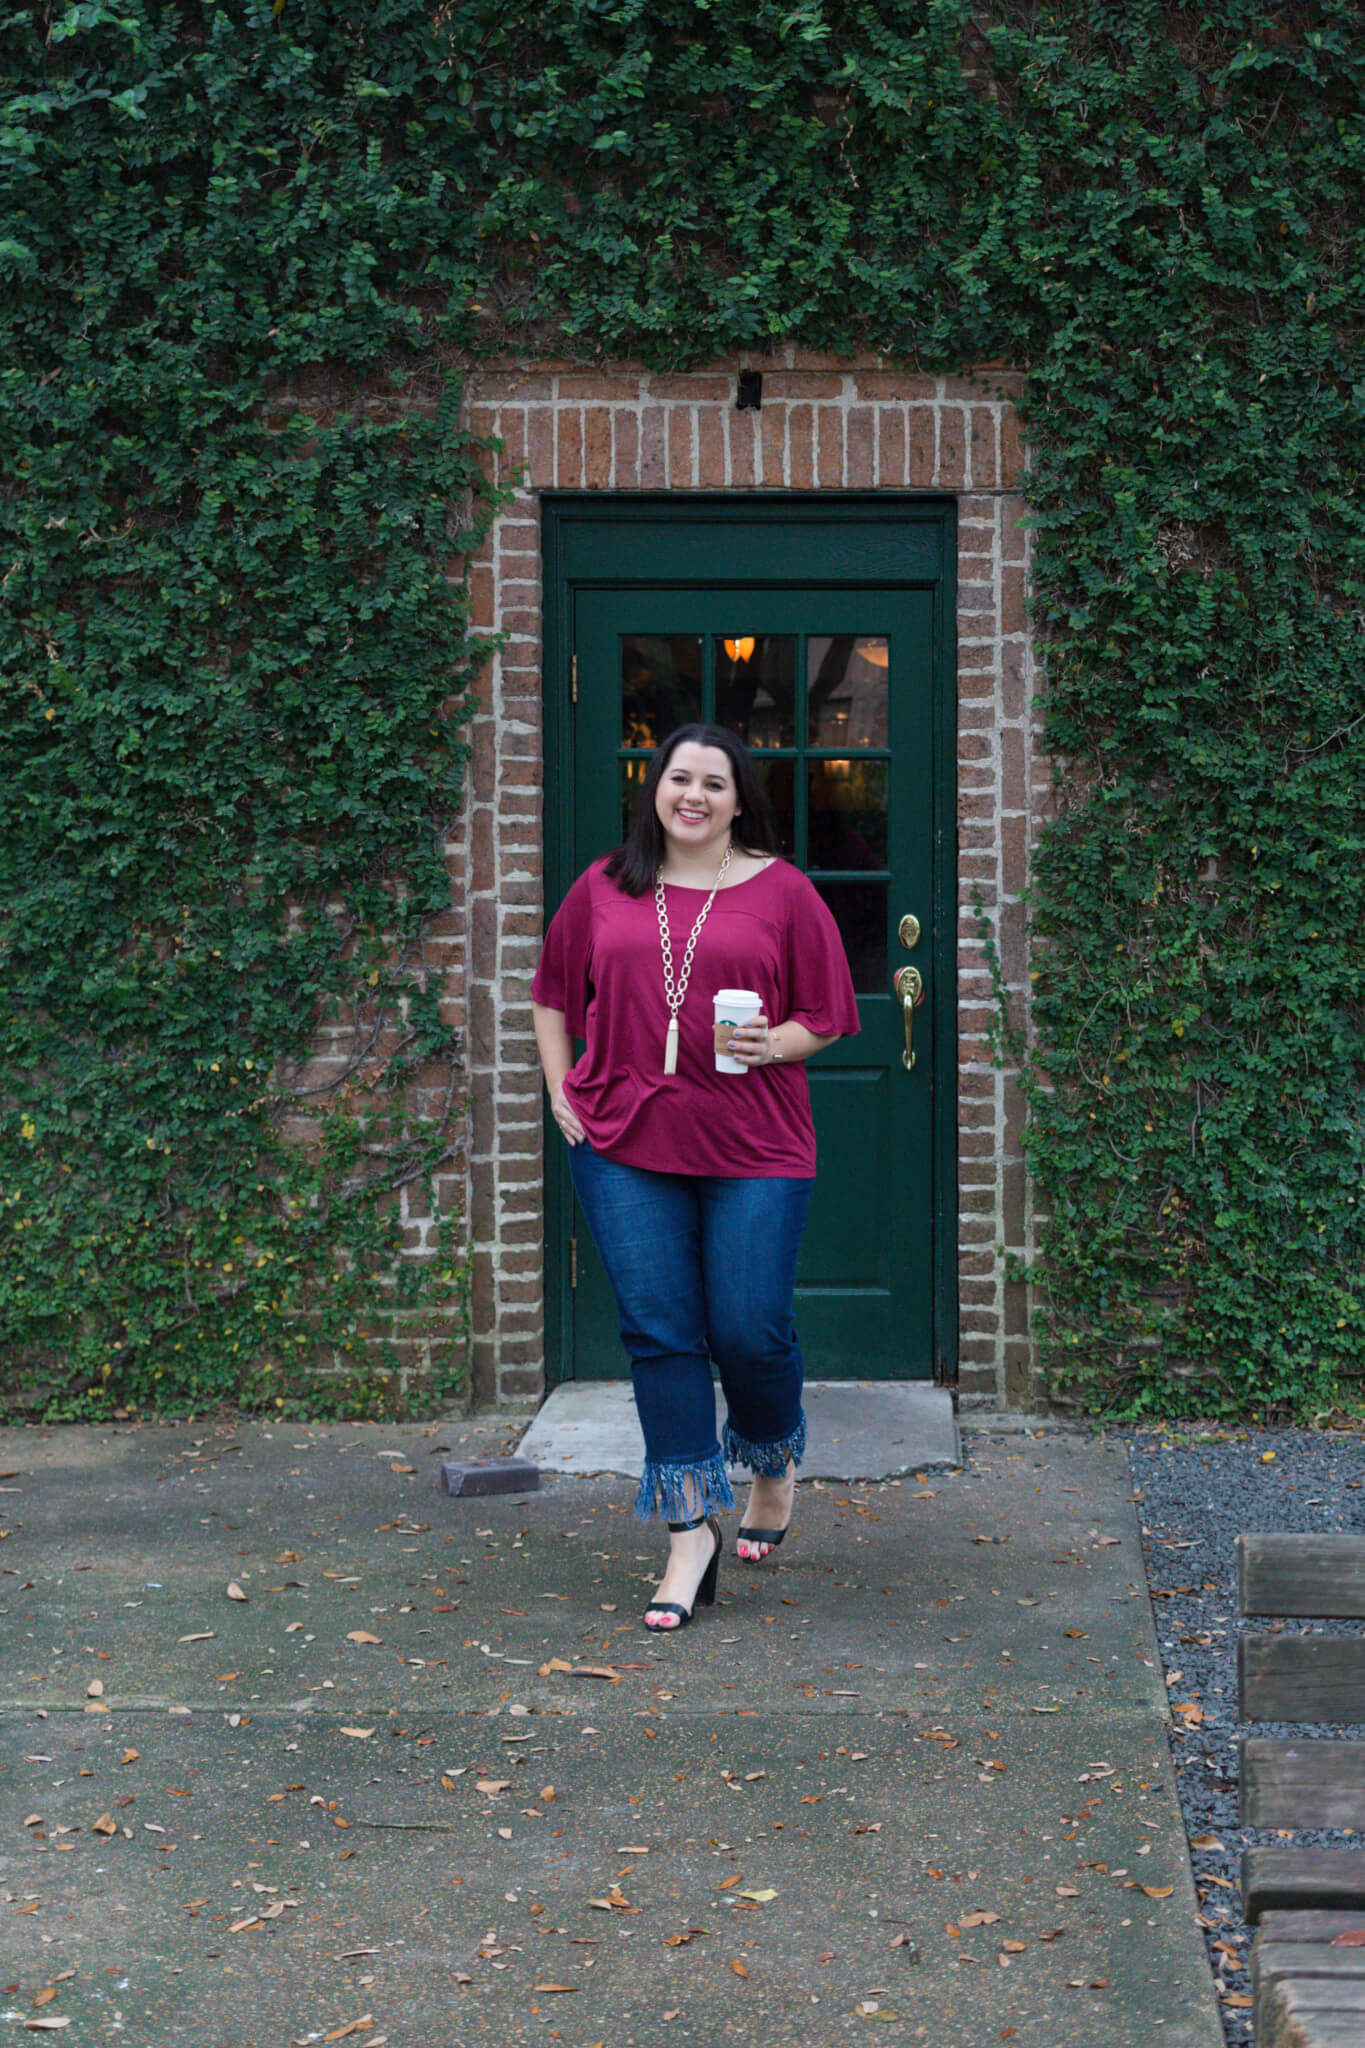 Fringe is one of my favorite trends of this season and I am so excited to have found a fabulous pair from Eloquii to pair with my burgundy Old Navy top and Kendra Scott chain necklace for my recent blog post on Something Gold, Something Blue, a curvy style blog by Emily Bastedo.